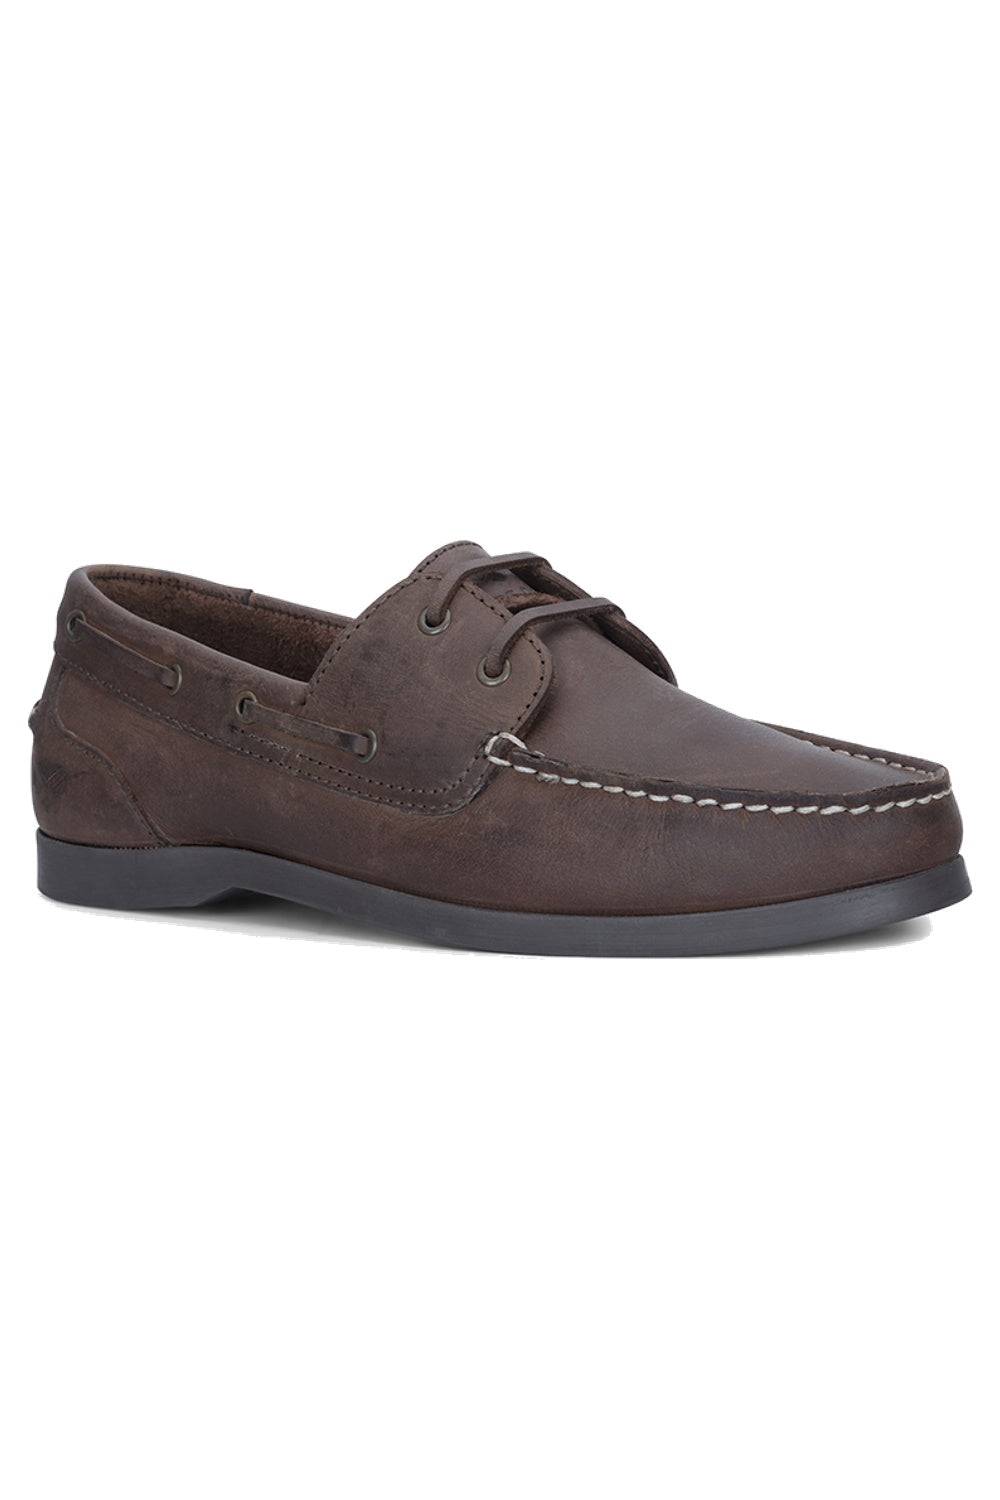 Hoggs of Fife Mull Deck Shoe- Waxy Brown 